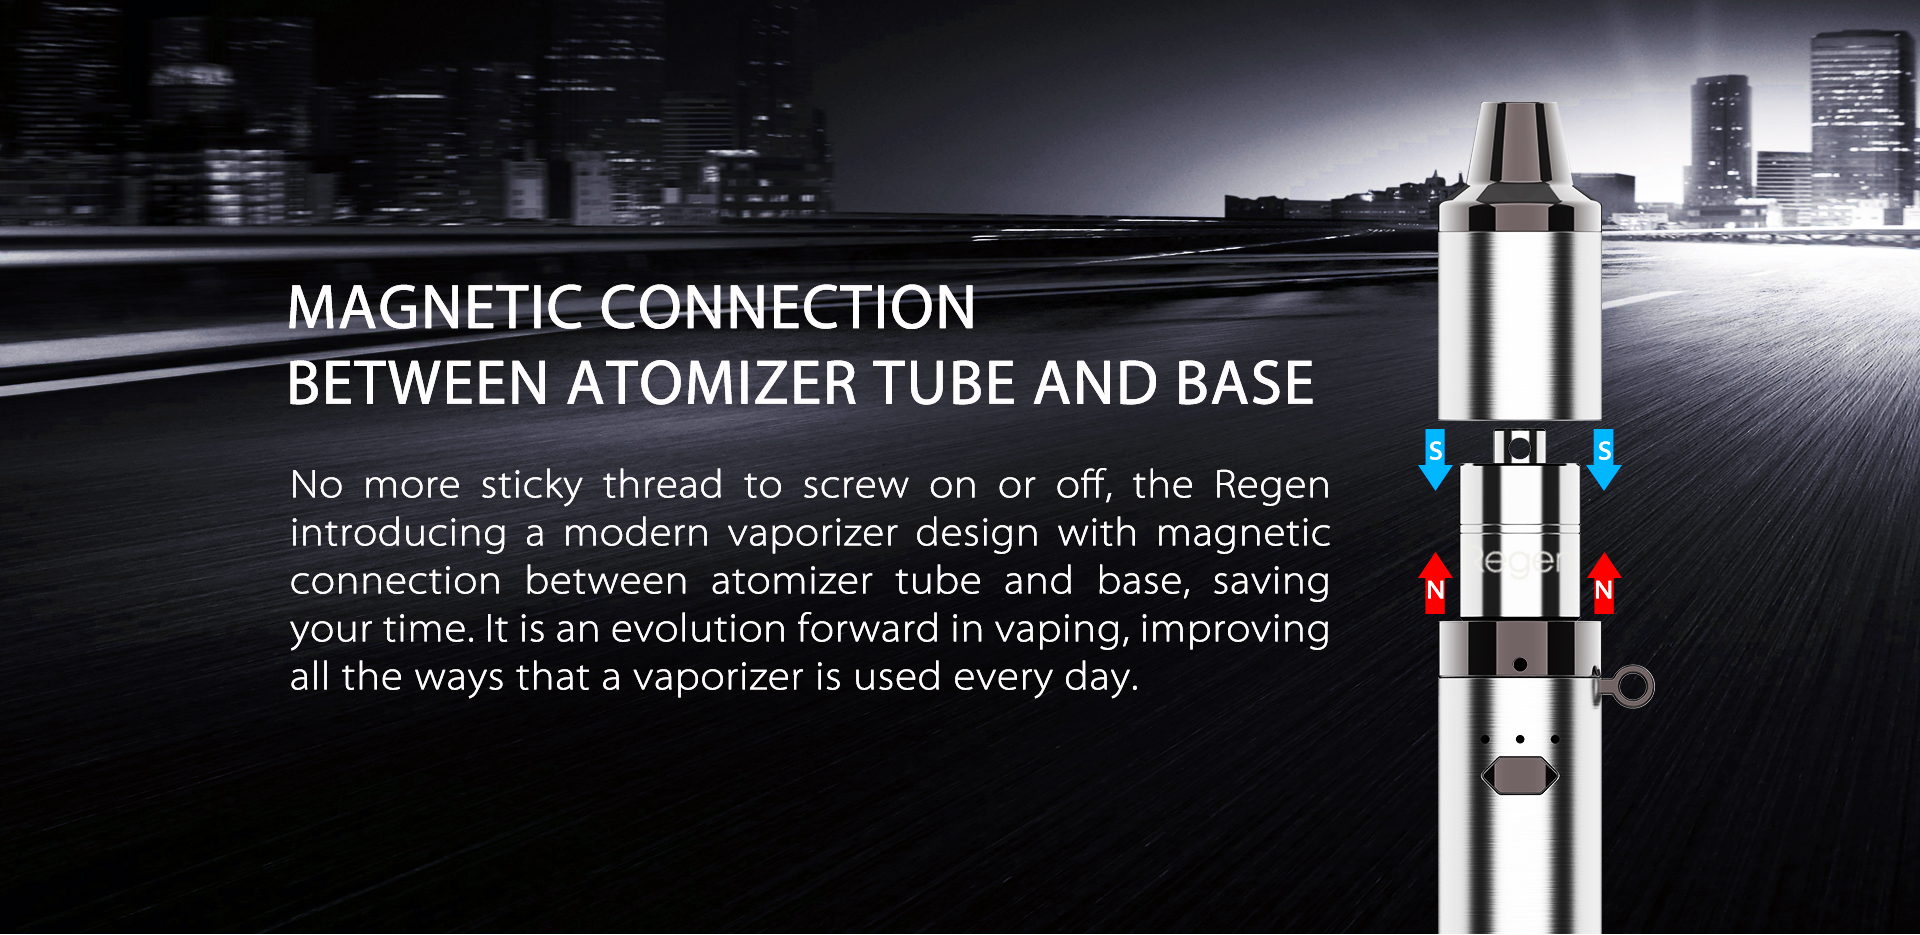 Yocan Regen vaporizer pen features Magnetic Connection Between Atomizer Tube And Base.